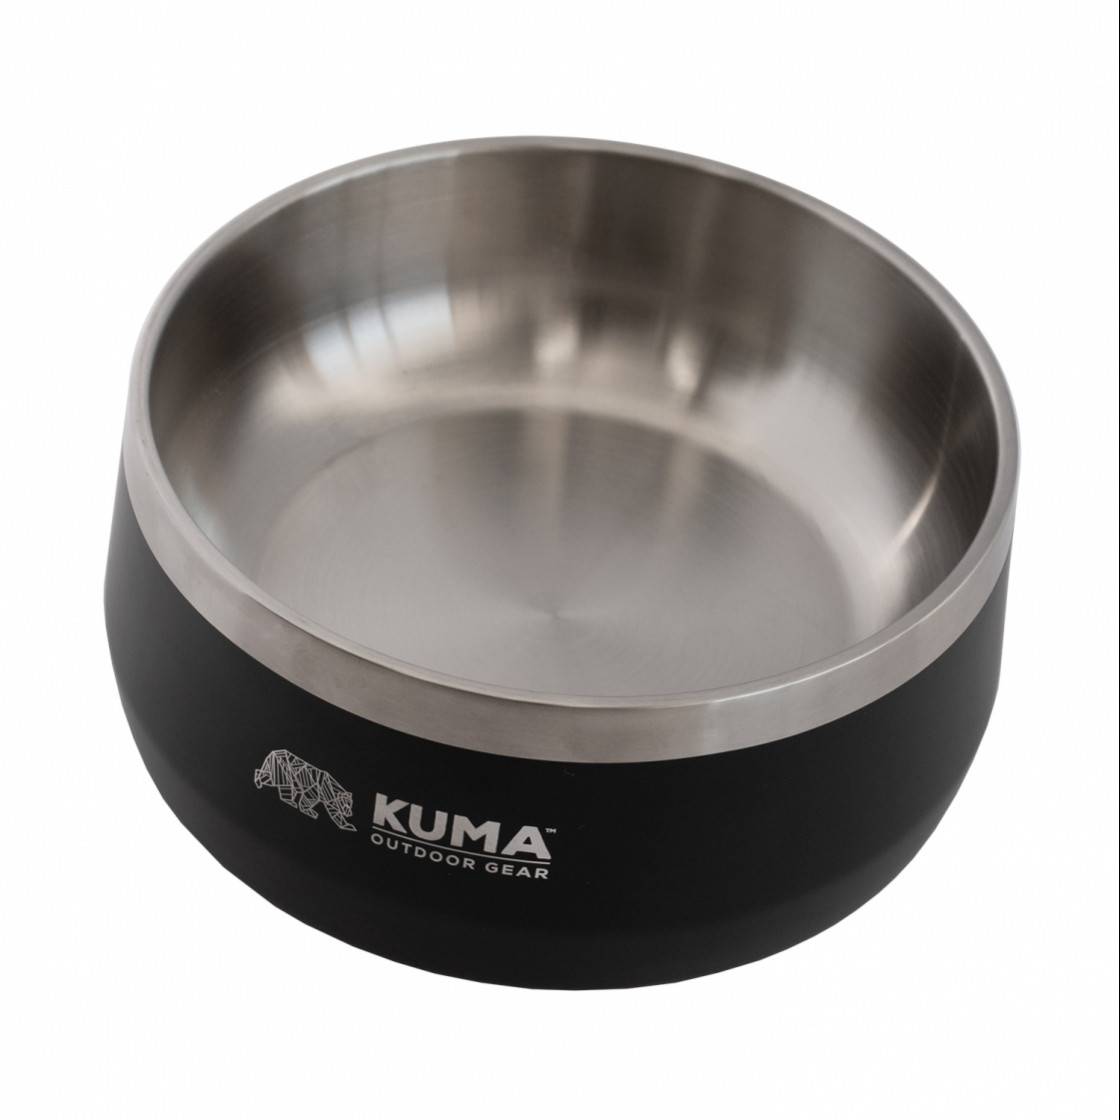 Stainless Steel Dog Bowl from Kuma